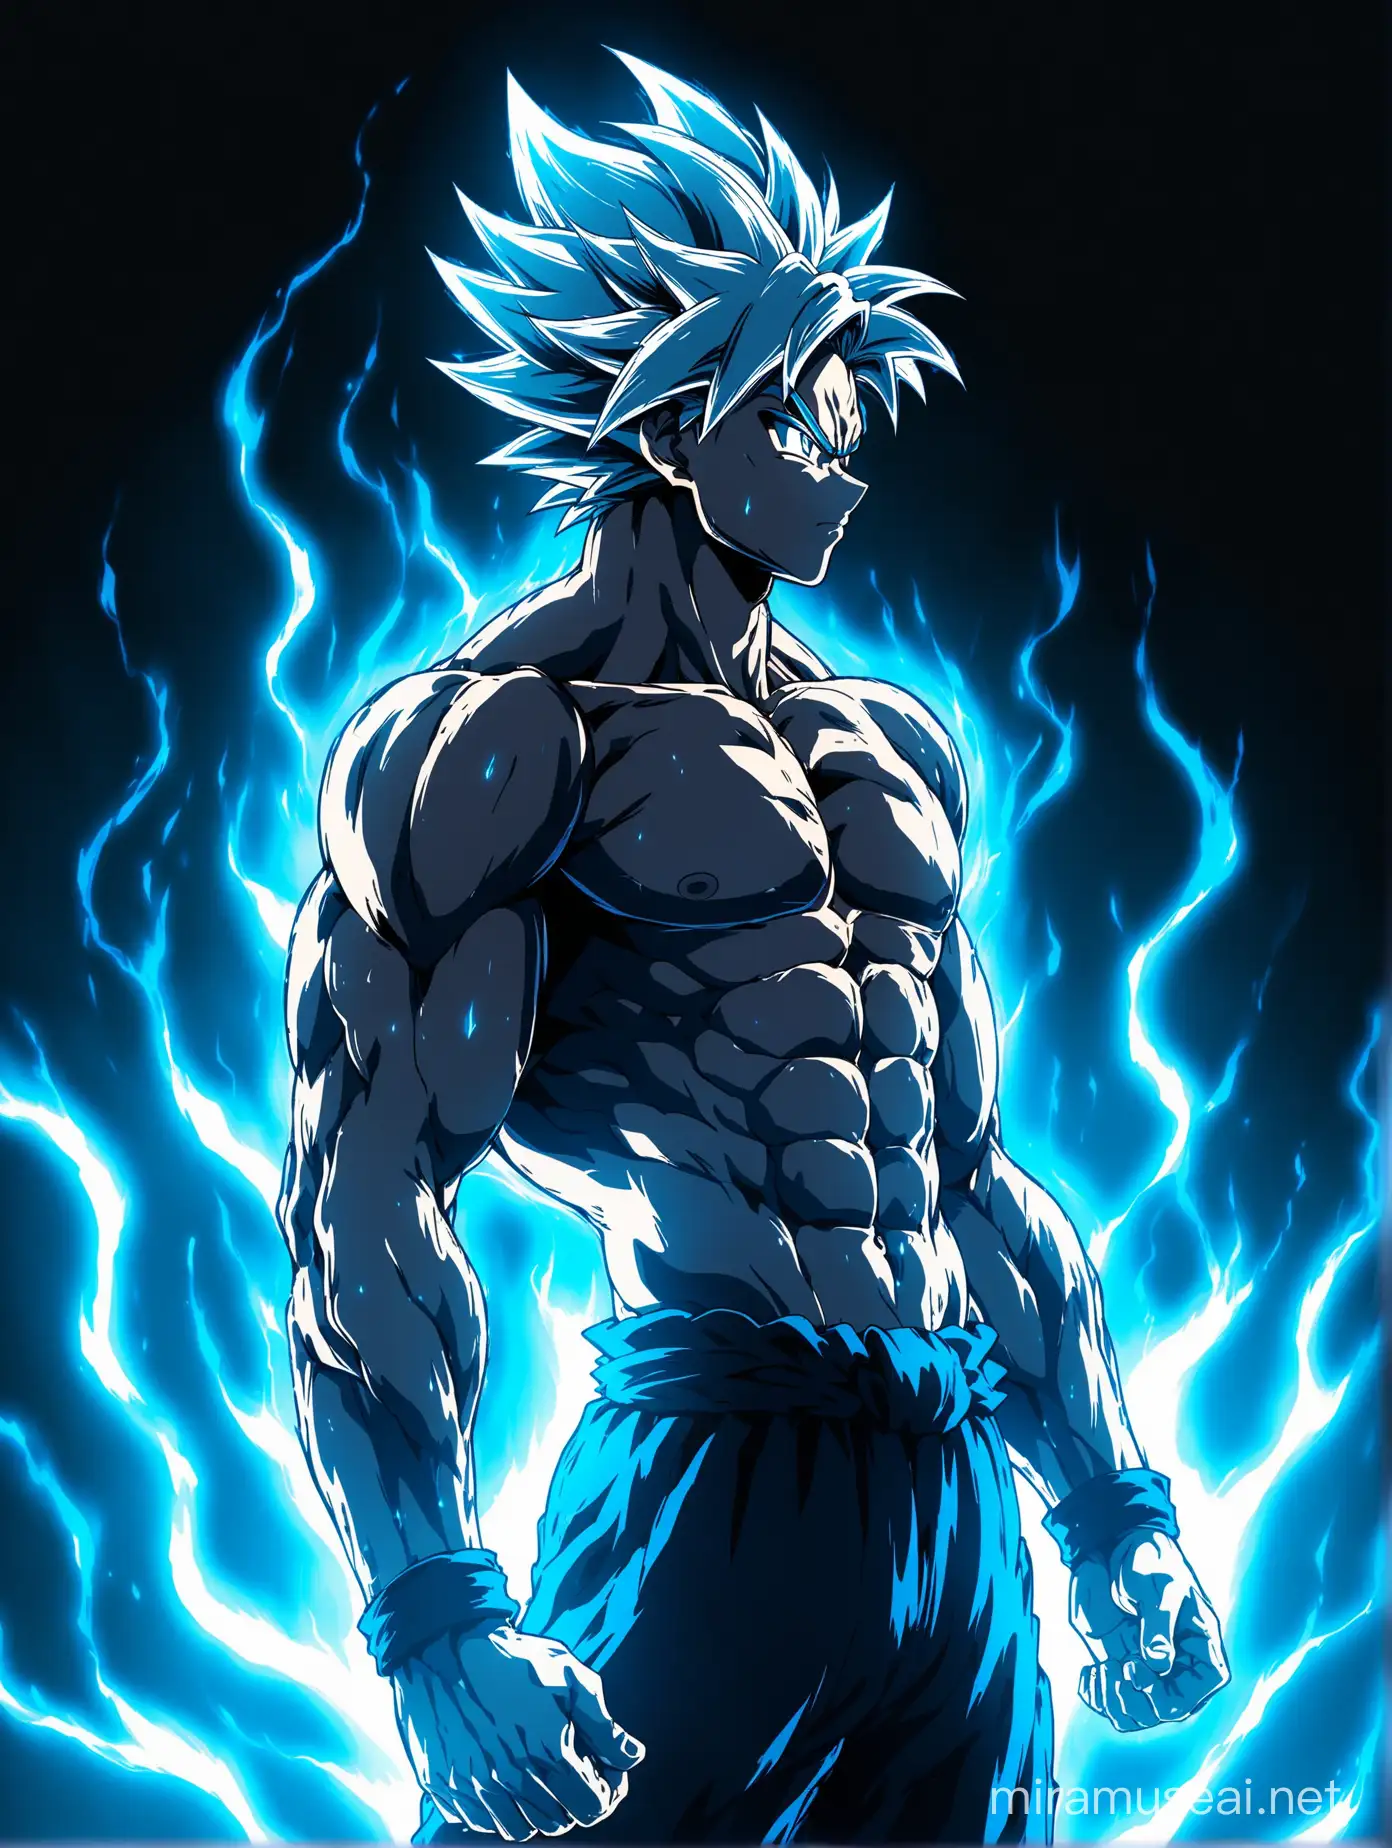 Shirtless Goku With a new very Dark Blue and Light Cyan transformation with strong ultra Dark BLue and Light blue lighting aura, he's lean and vascular, he has white hair only no other colors, side view